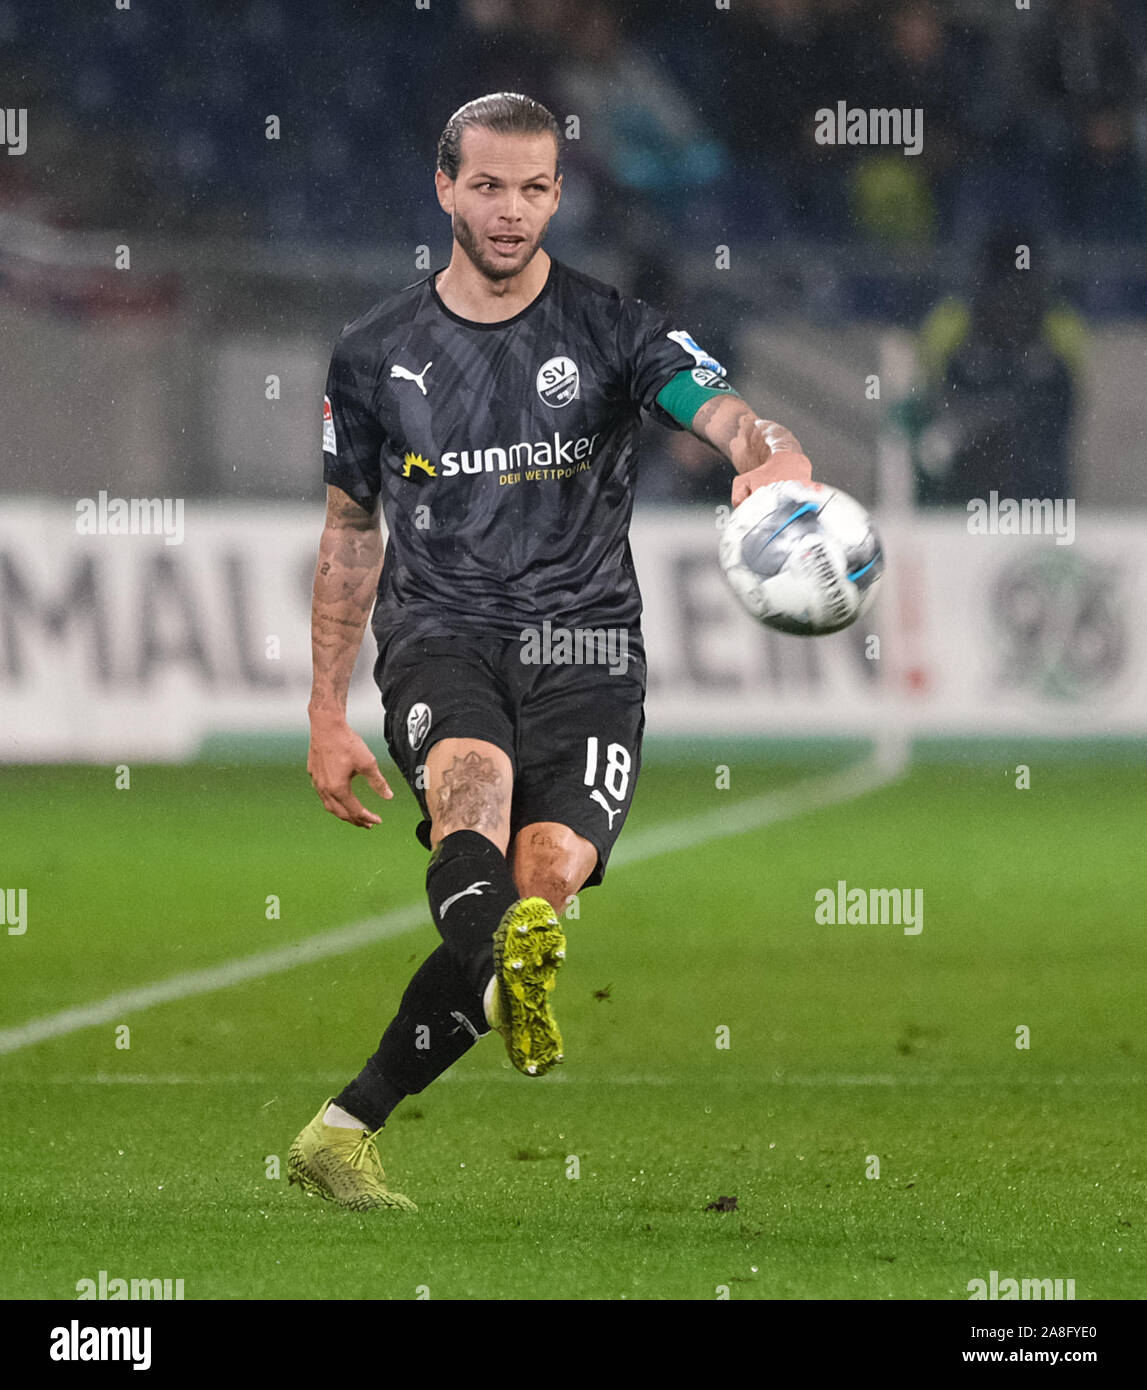 Hanover, Germany. 01st Nov, 2019. Soccer: 2nd Bundesliga, 12th matchday: Hannover 96 - SV Sandhausen in the HDI-Arena in Hannover. Sandhausen's Dennis Diekmeier is on the ball. Credit: Peter Steffen/dpa - IMPORTANT NOTE: In accordance with the requirements of the DFL Deutsche Fußball Liga or the DFB Deutscher Fußball-Bund, it is prohibited to use or have used photographs taken in the stadium and/or the match in the form of sequence images and/or video-like photo sequences./dpa/Alamy Live News Stock Photo